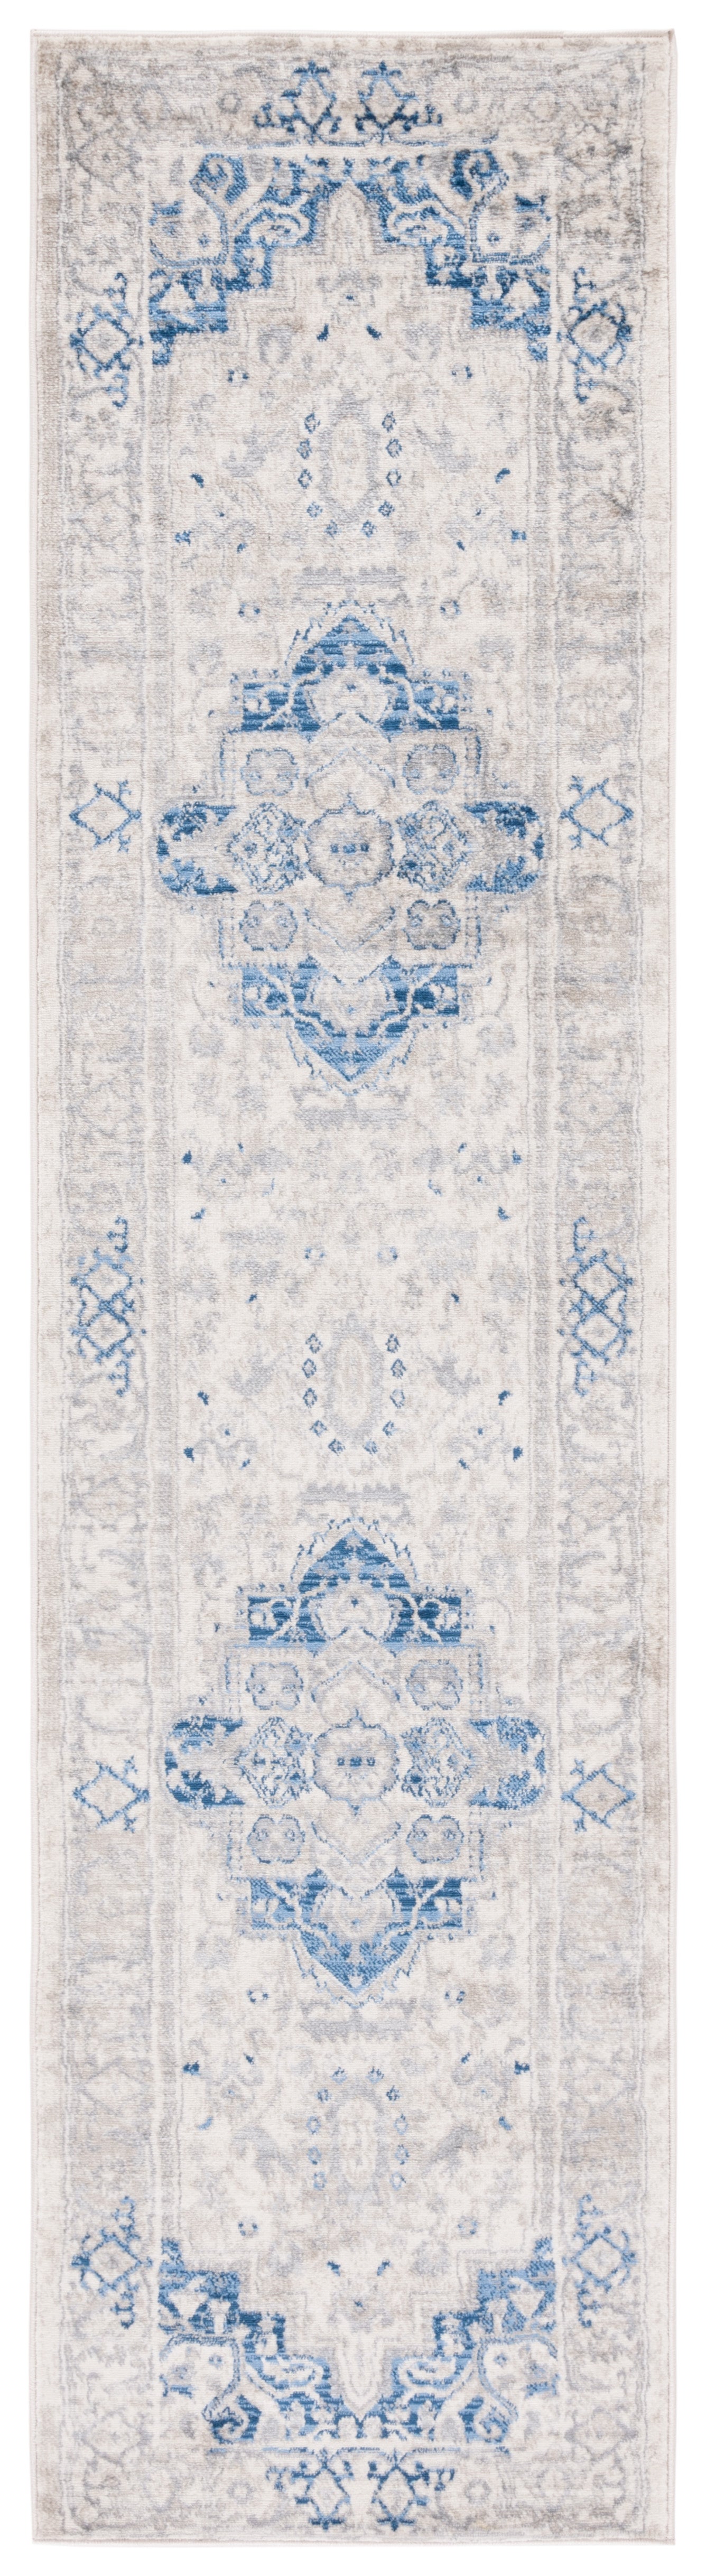 Safavieh Brentwood Bnt851A Ivory/Blue Area Rug